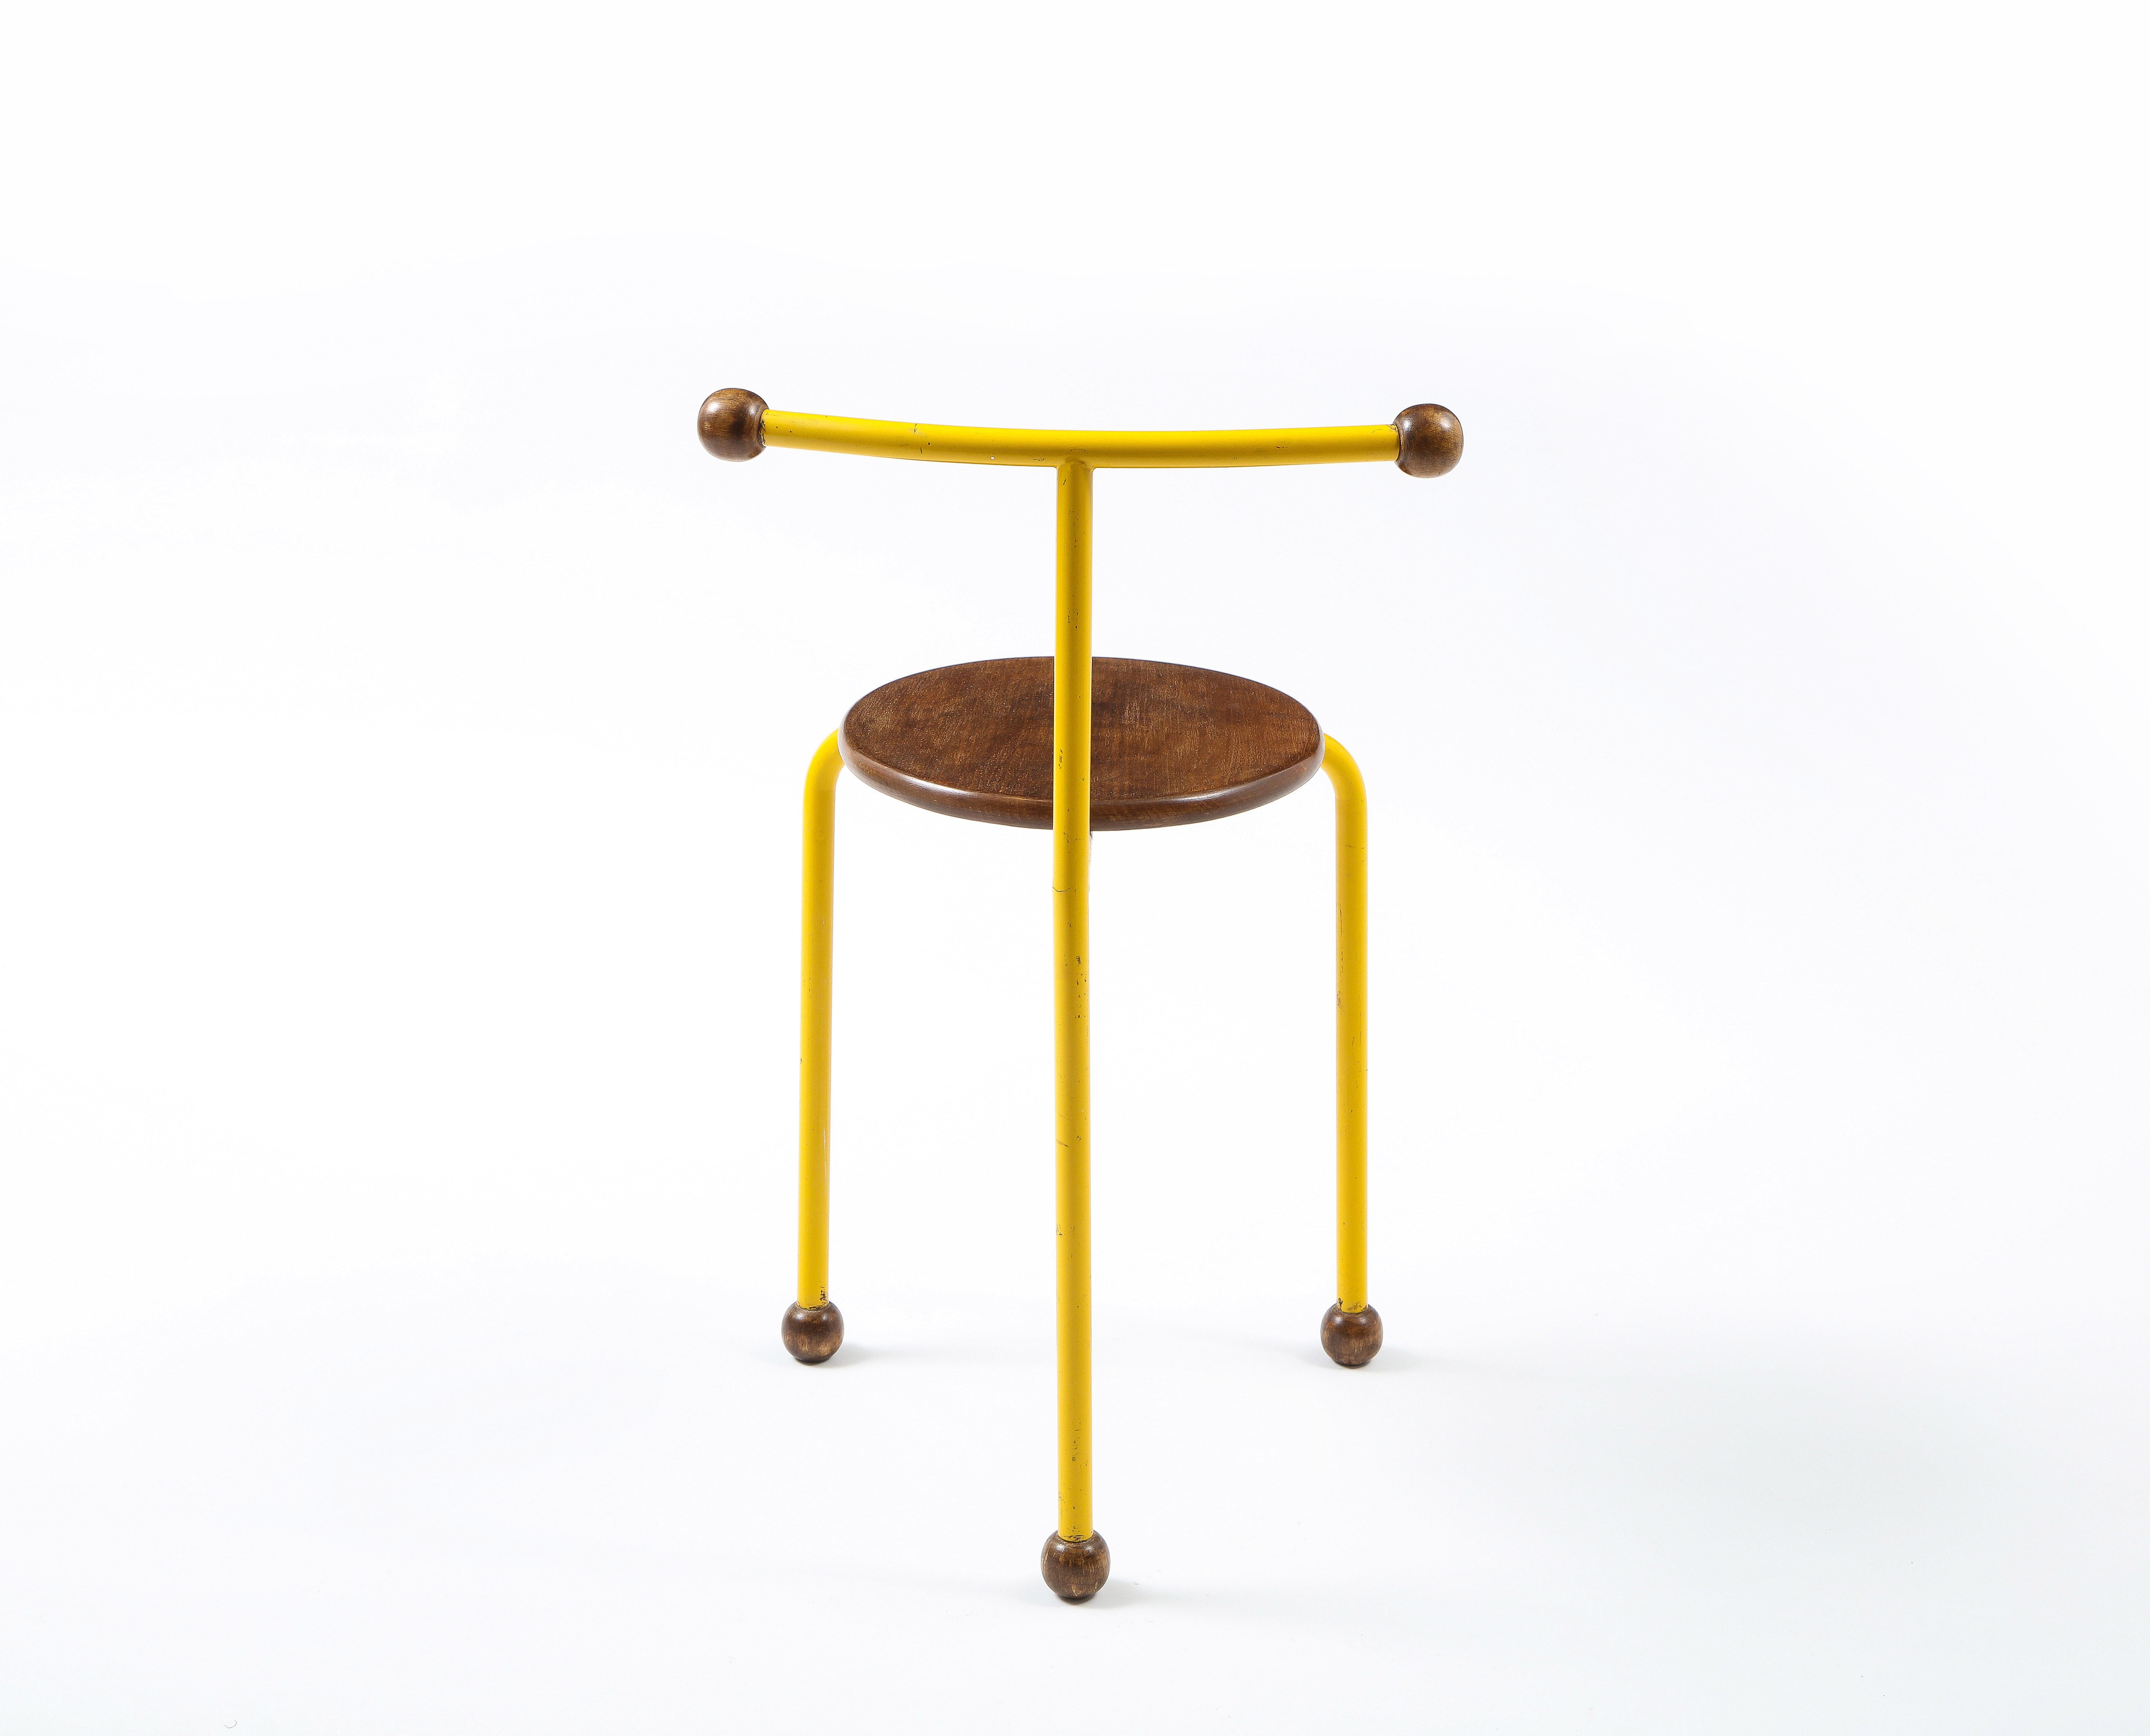 20th Century Post Modern Oak & Yellow Steel Small Sculptural Chair, France 1980's For Sale